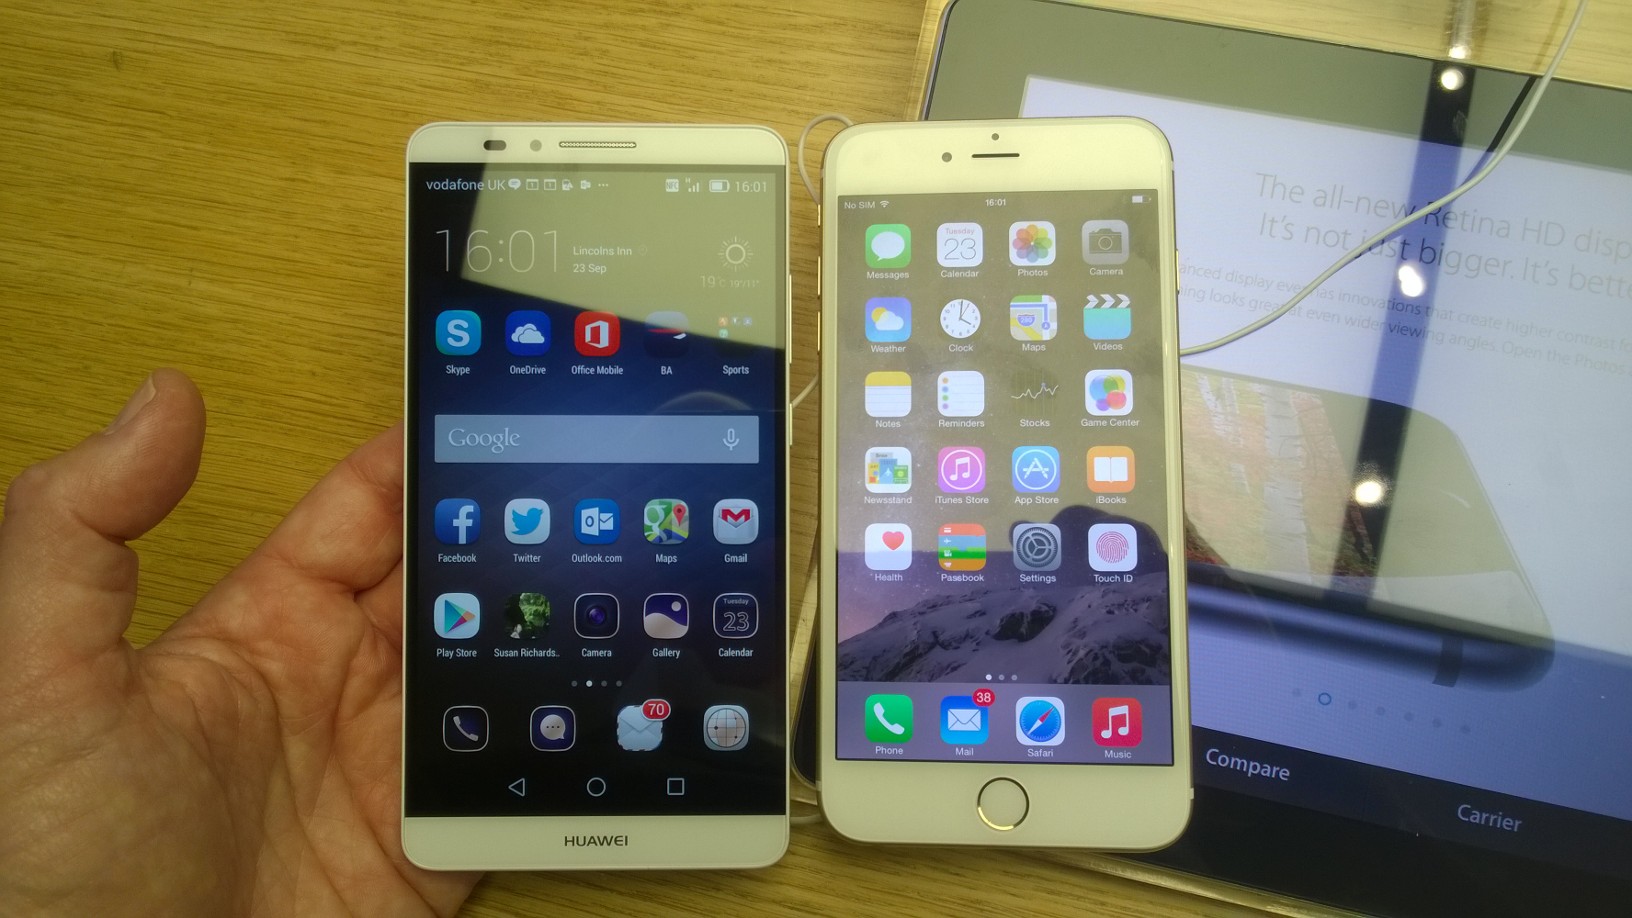 6Plus and Mate7 2